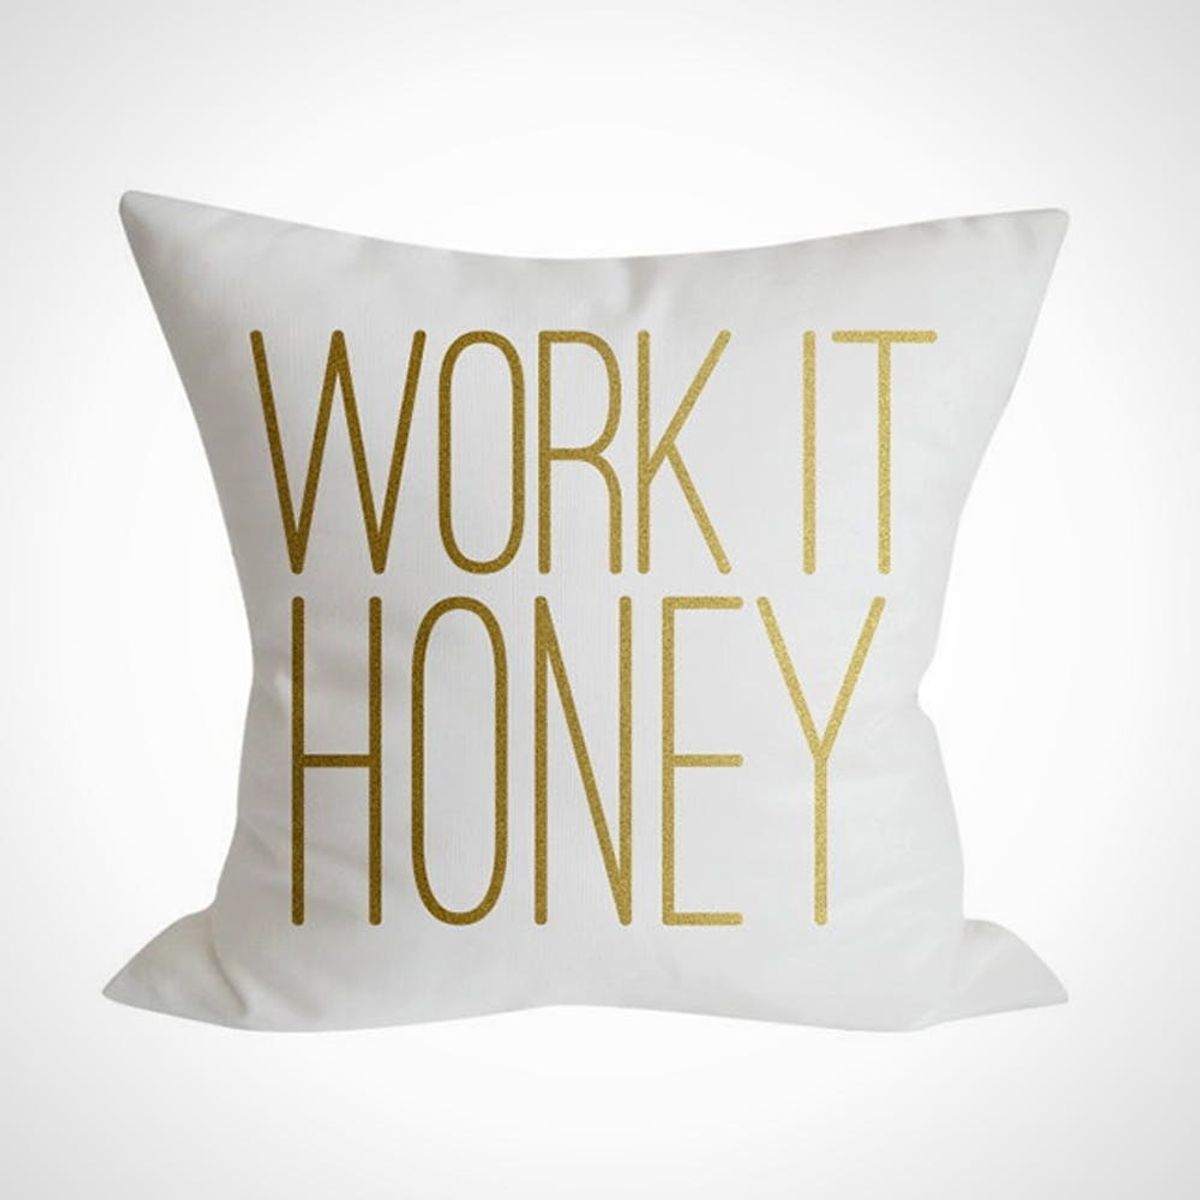 23 Accent Pillows You Can’t Live Without